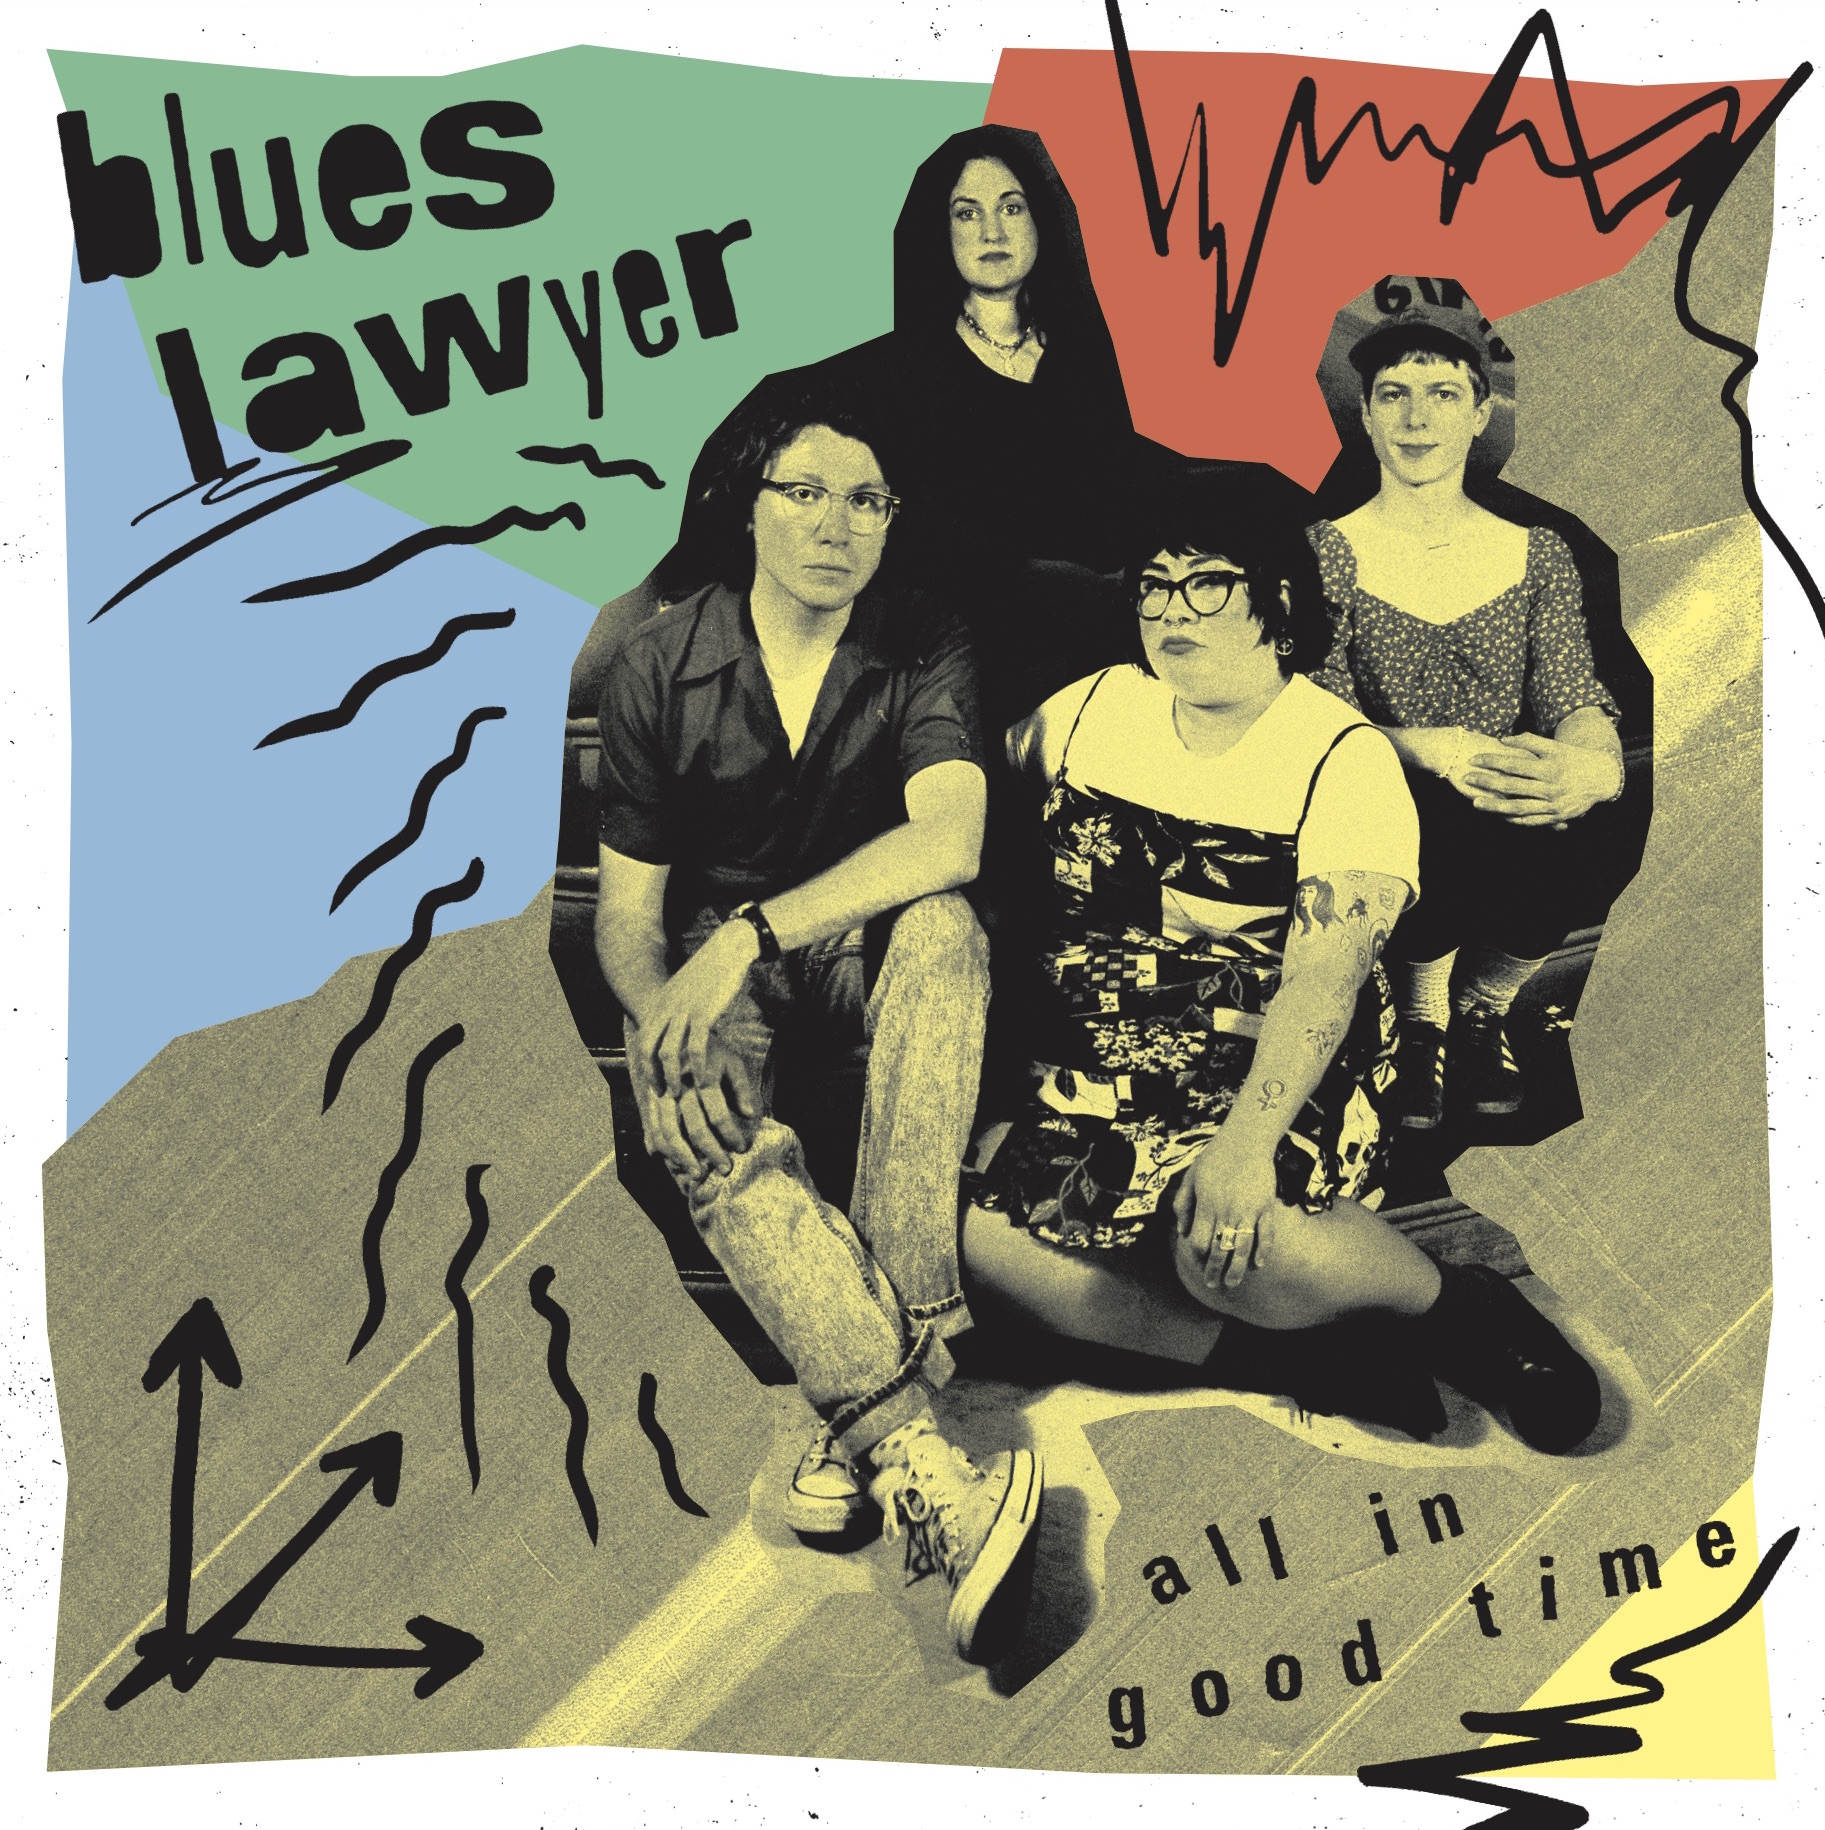 Blues Lawyer announces new LP on Dark Entries out Feb. 17, shares alien-themed “Chance Encounters” video